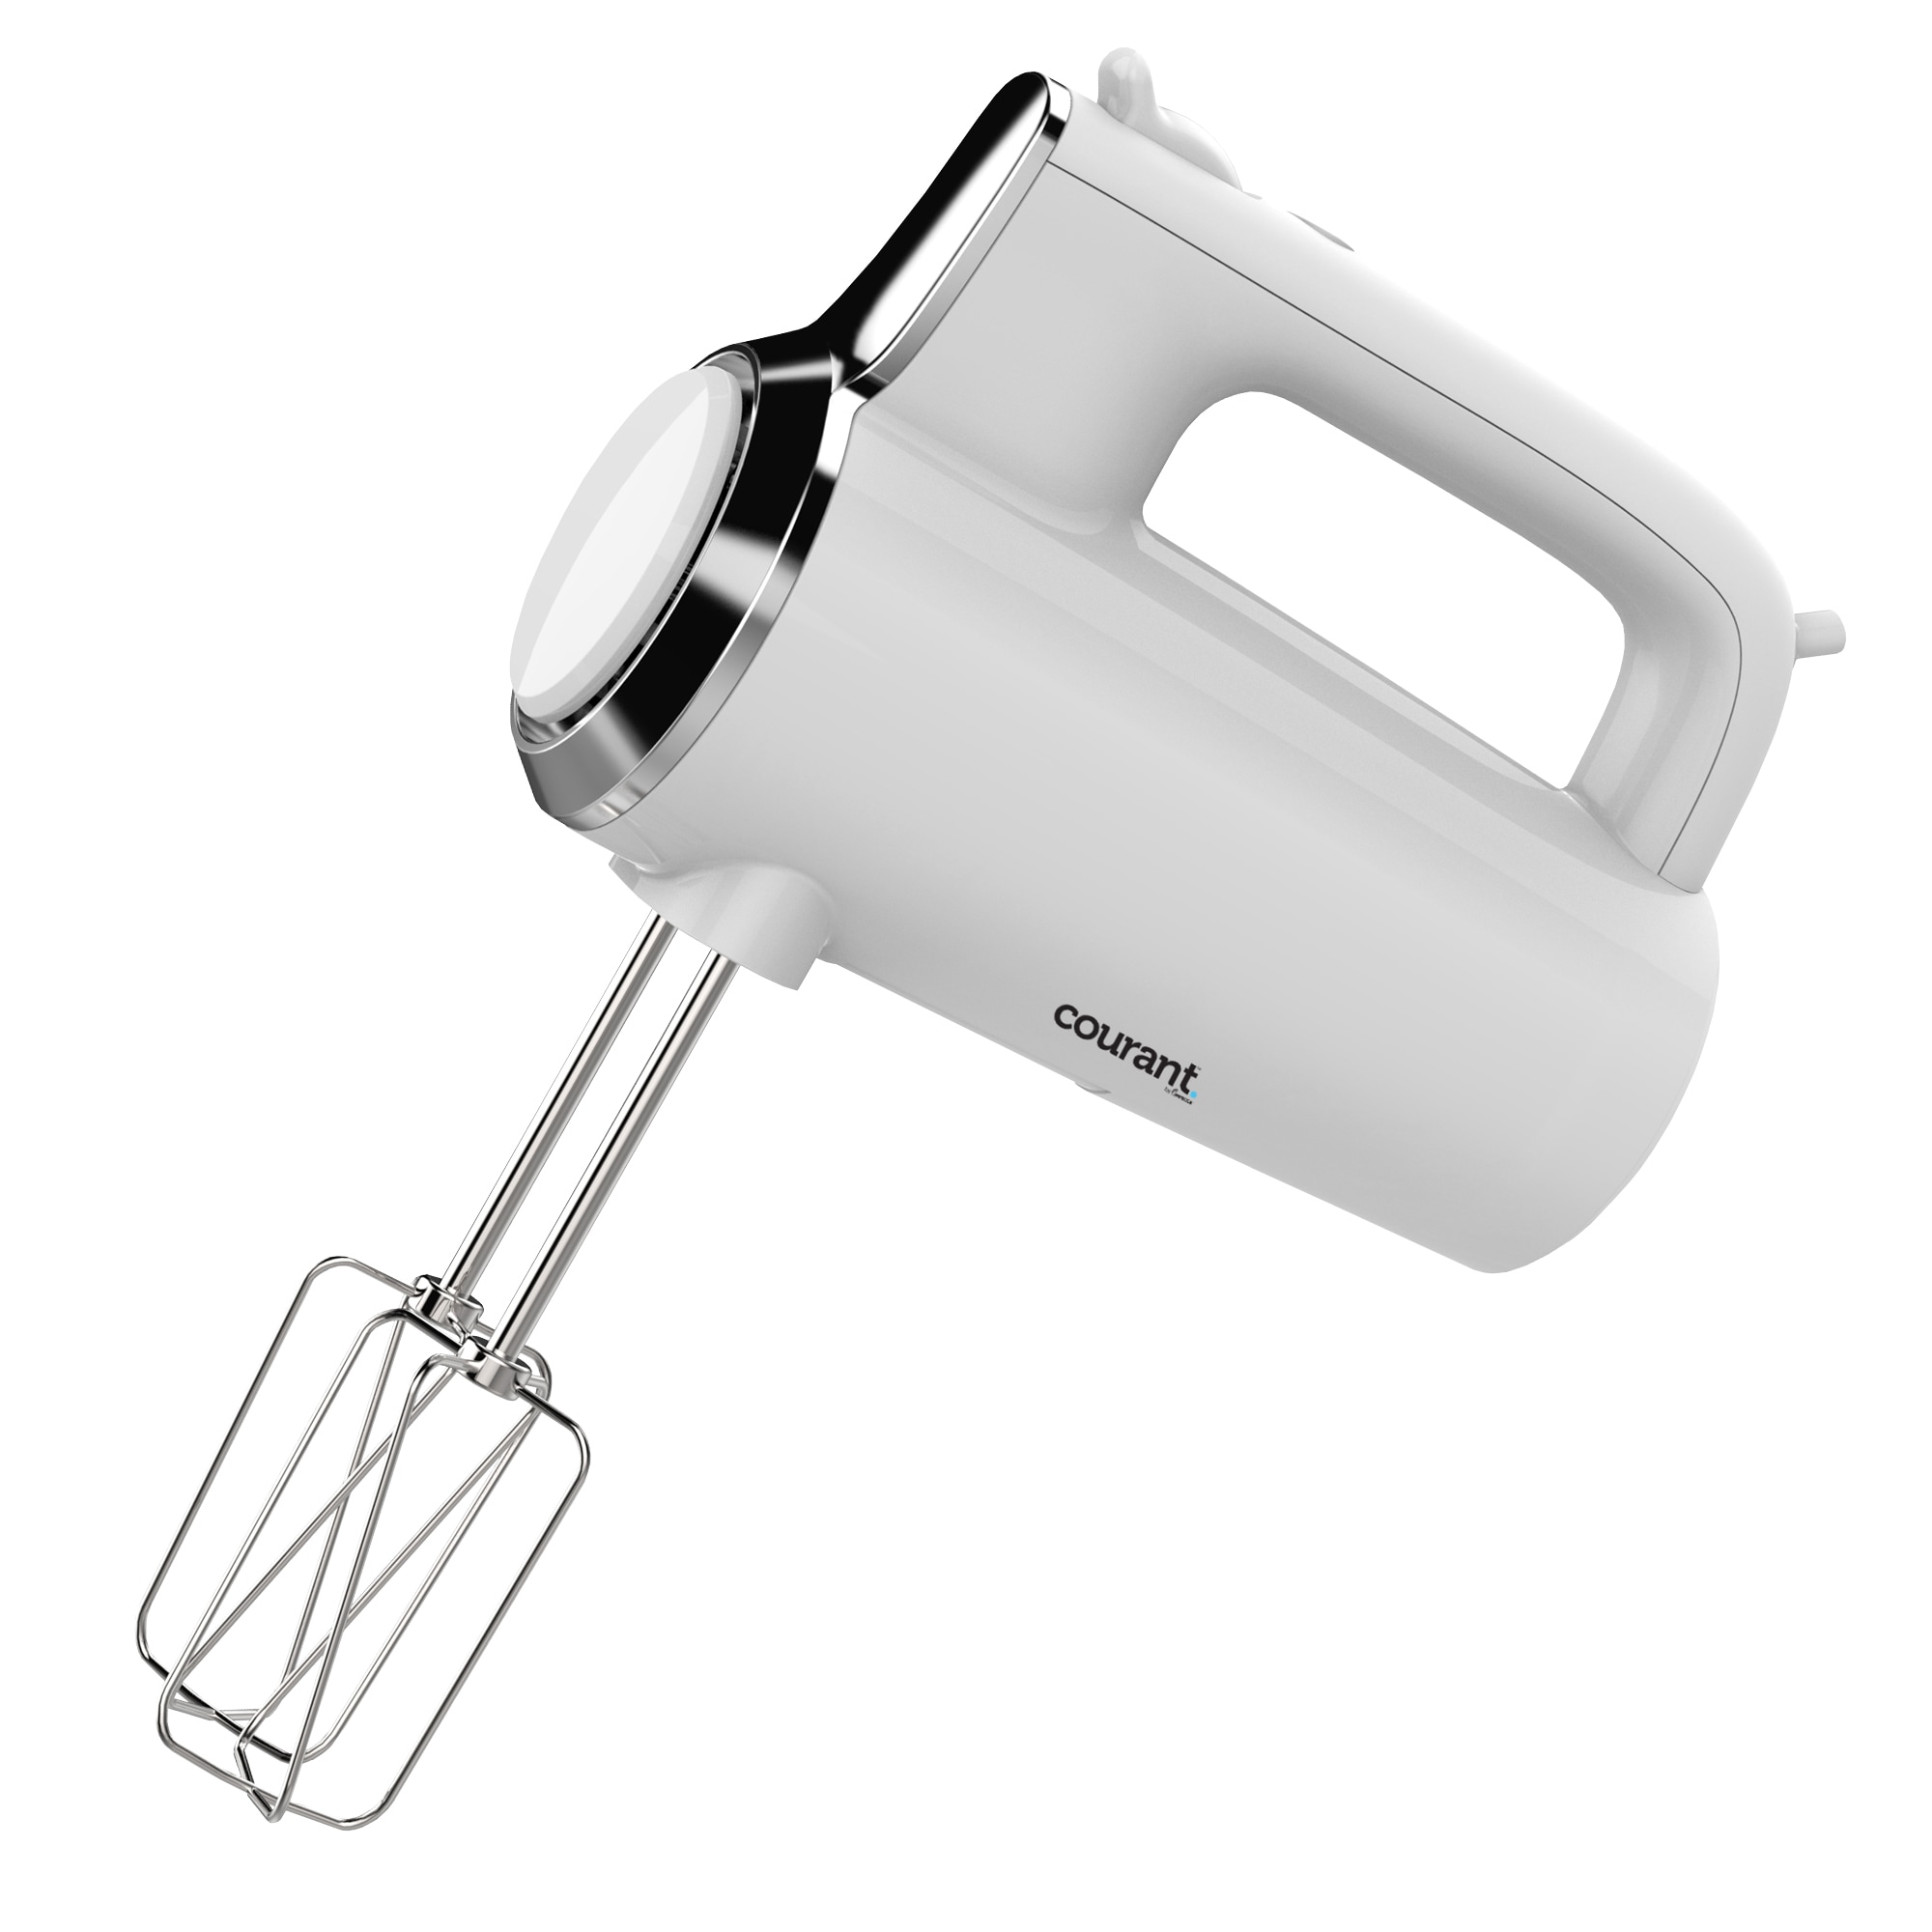 Galanz 59.84-in Cord 5-Speed Red Hand Mixer in the Hand Mixers department  at